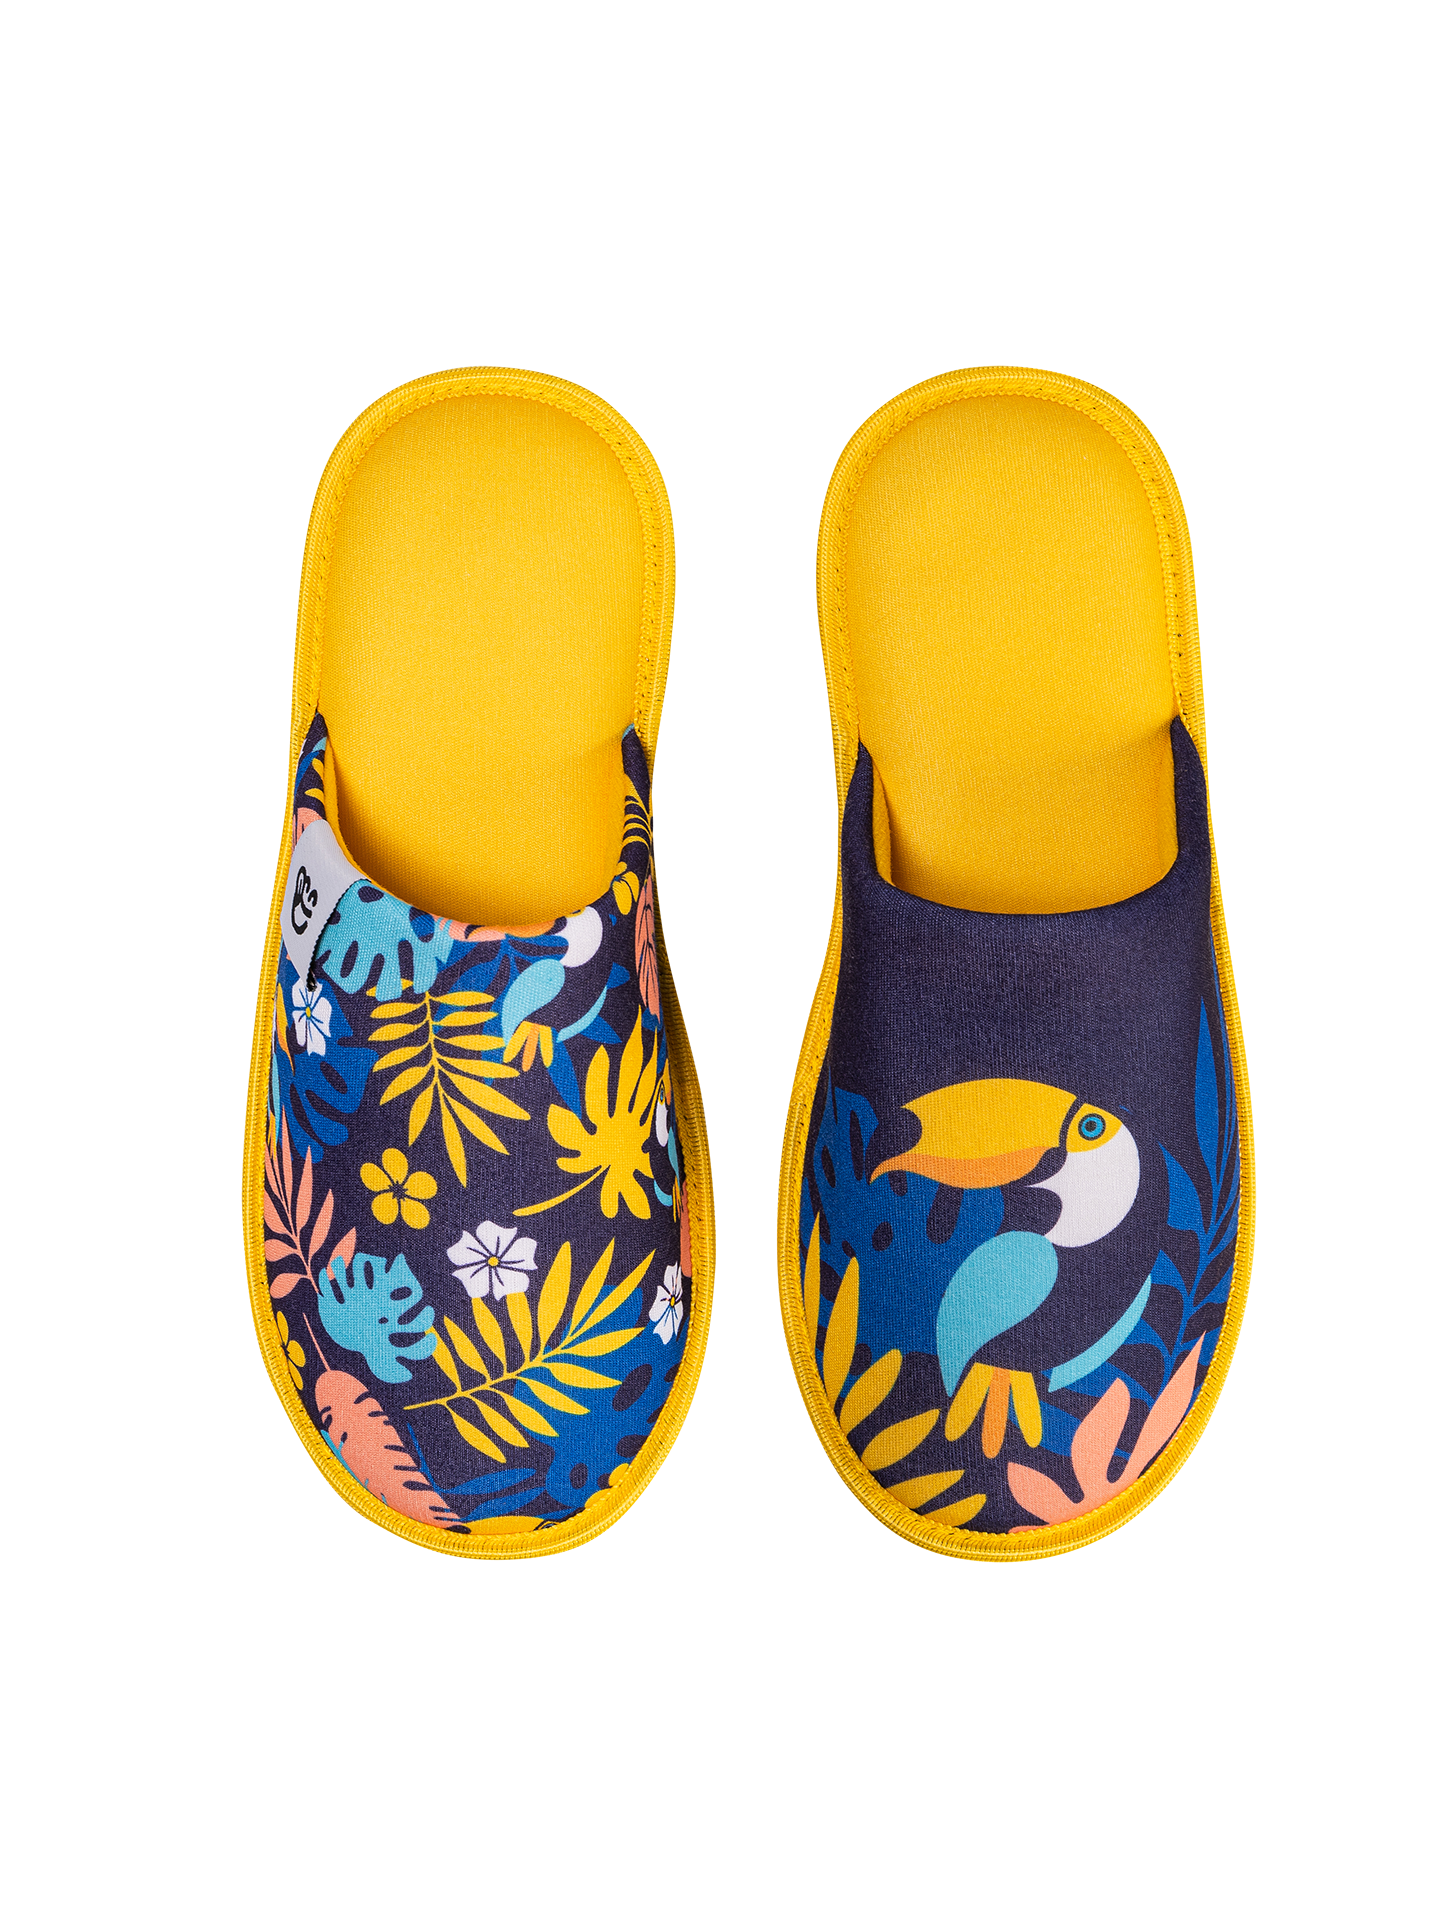 Slippers Tropical Toucan